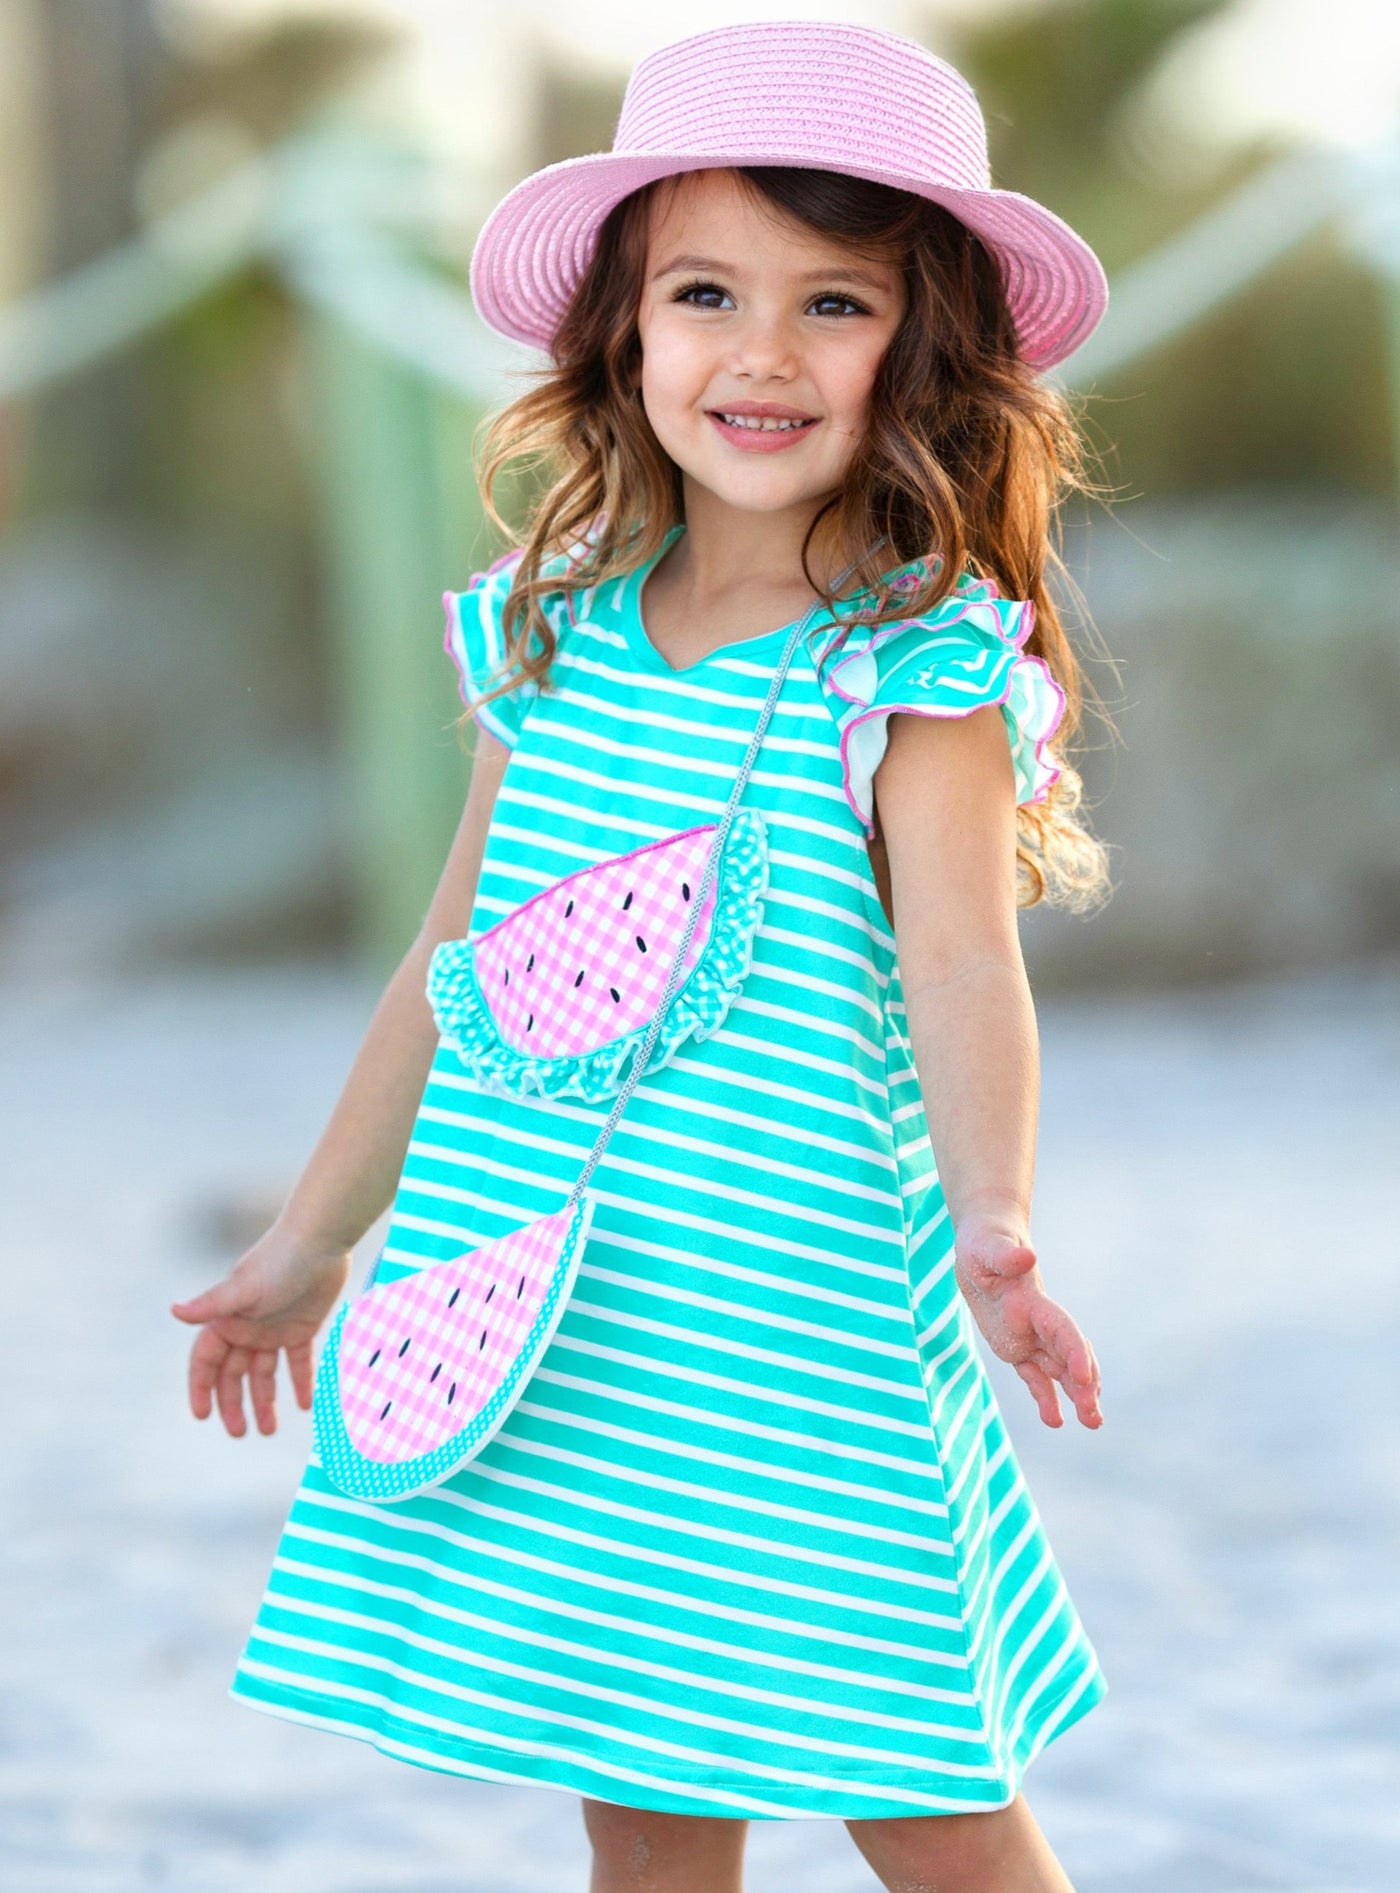 Mia Belle Girls Watermelon Dress And Purse | Girls Spring Outfits